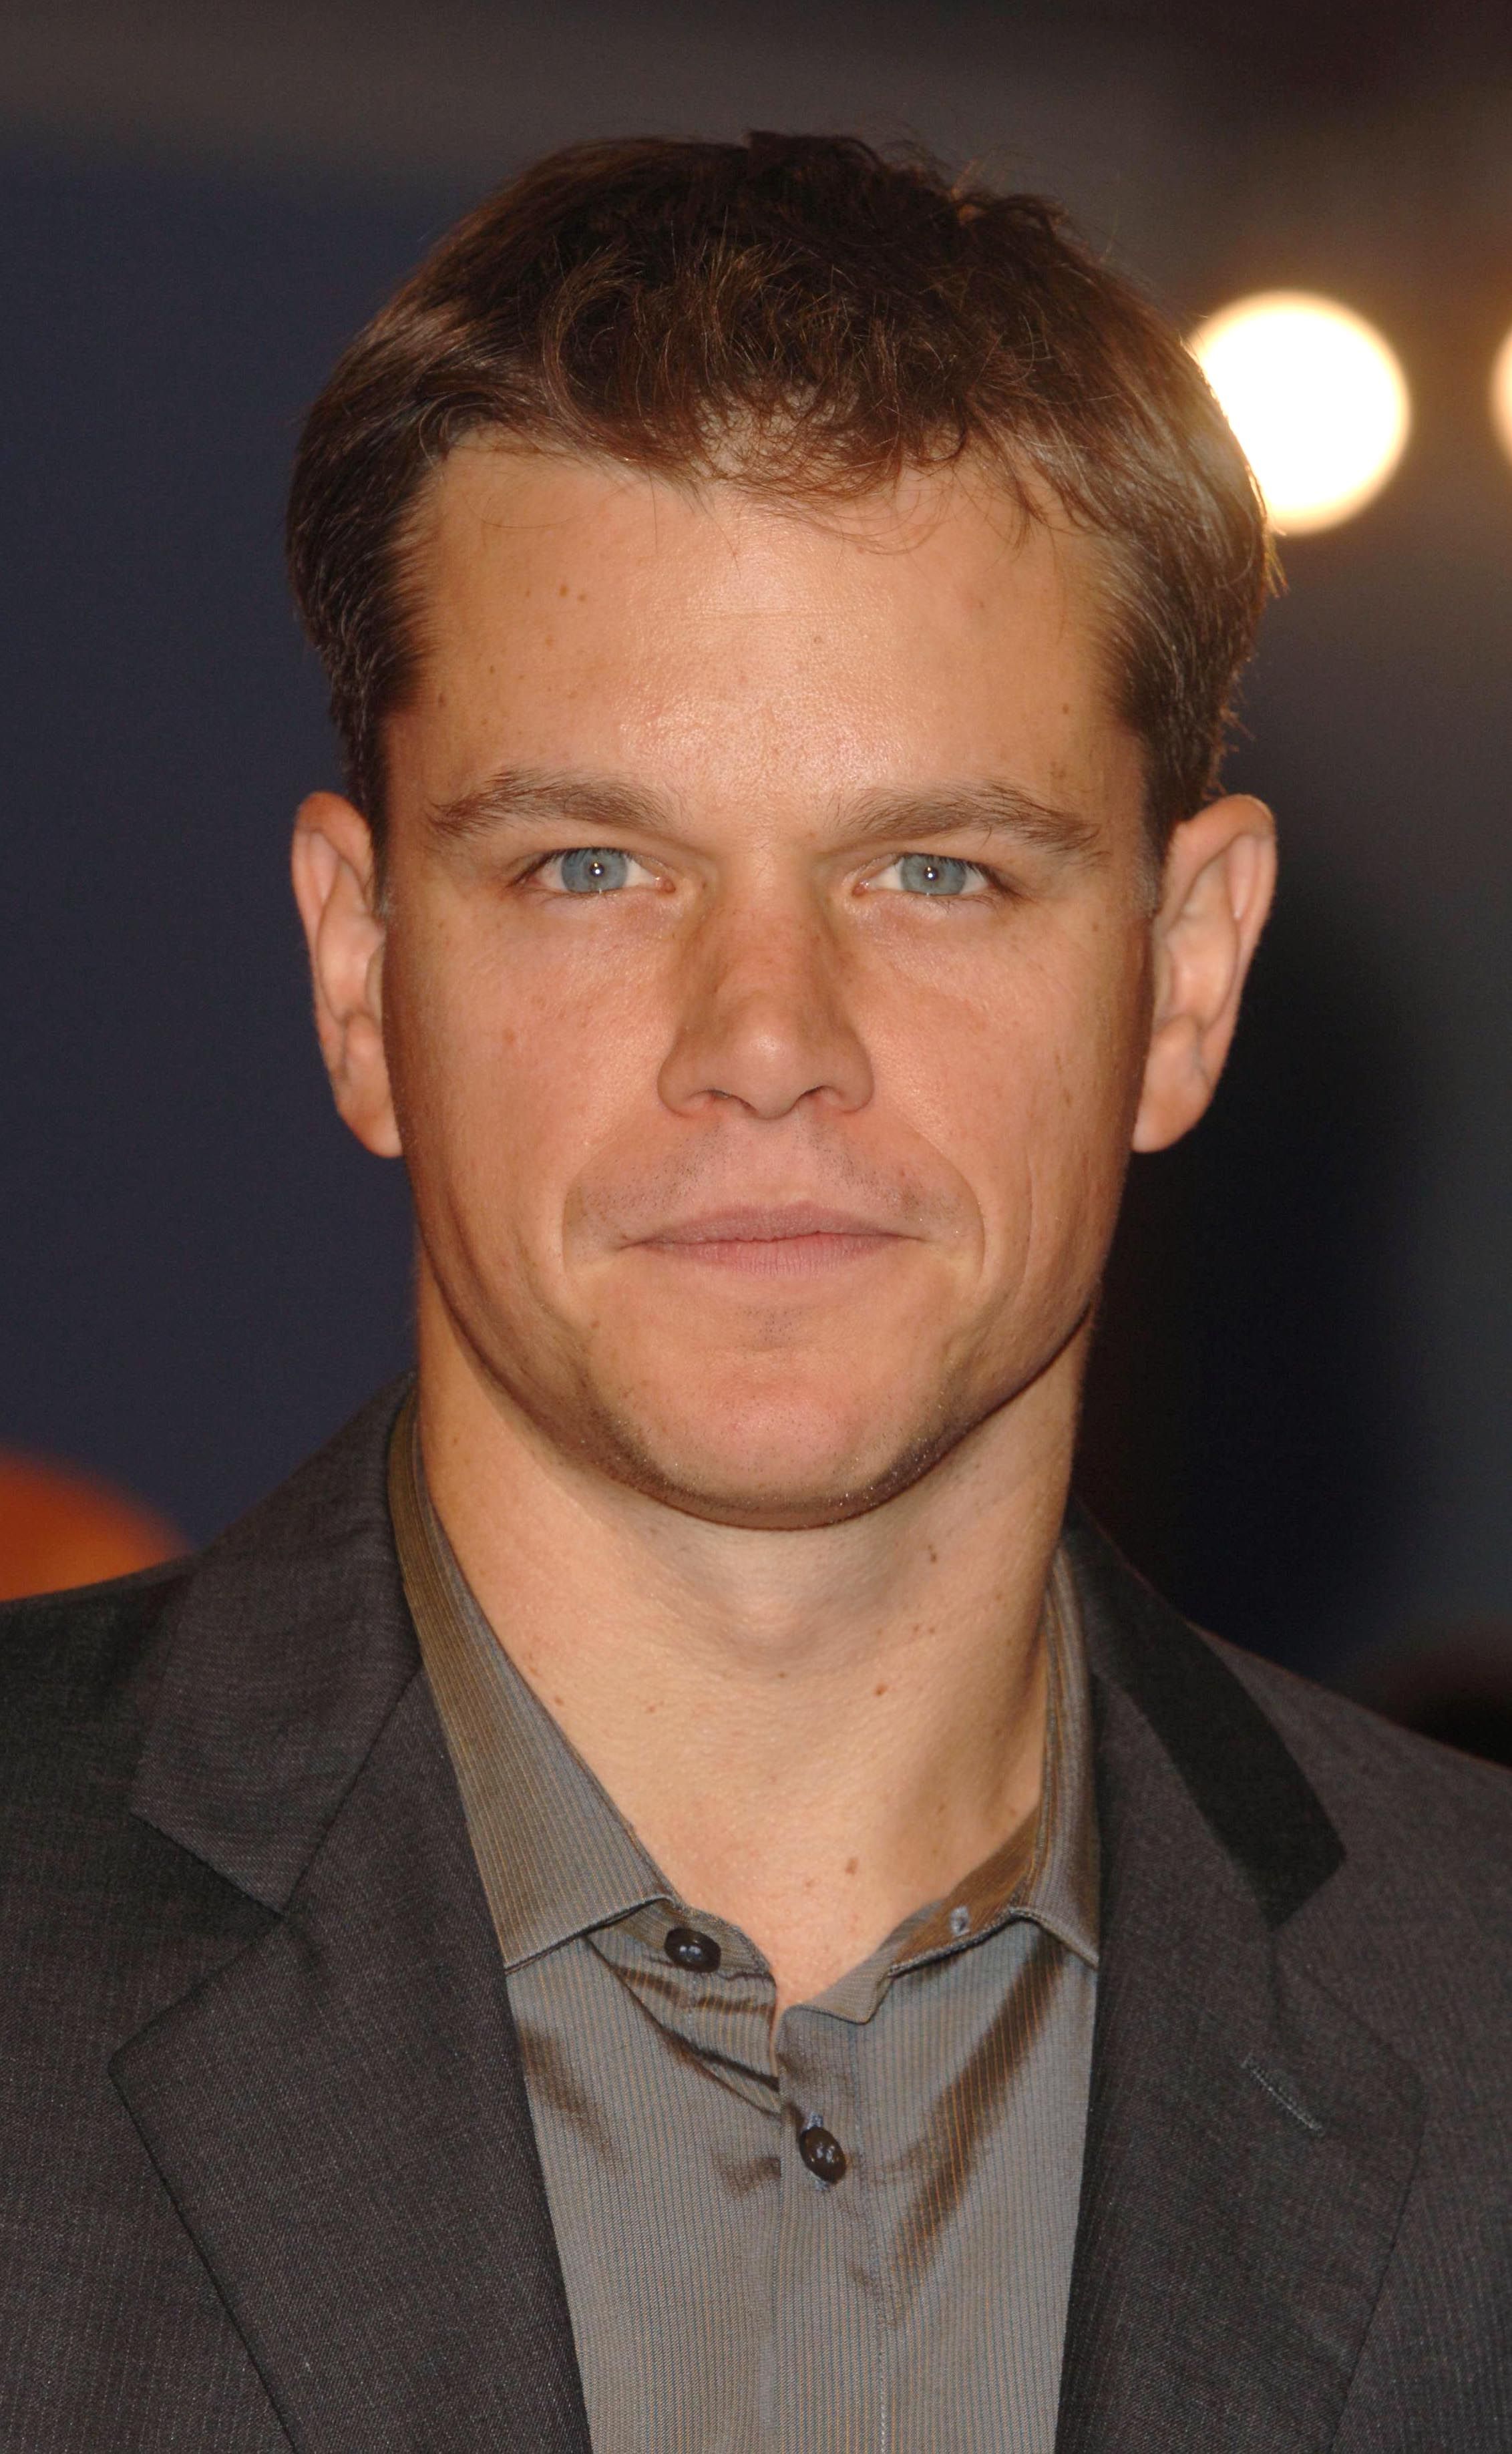 Promised Land,' With Matt Damon, Directed by Gus Van Sant - The